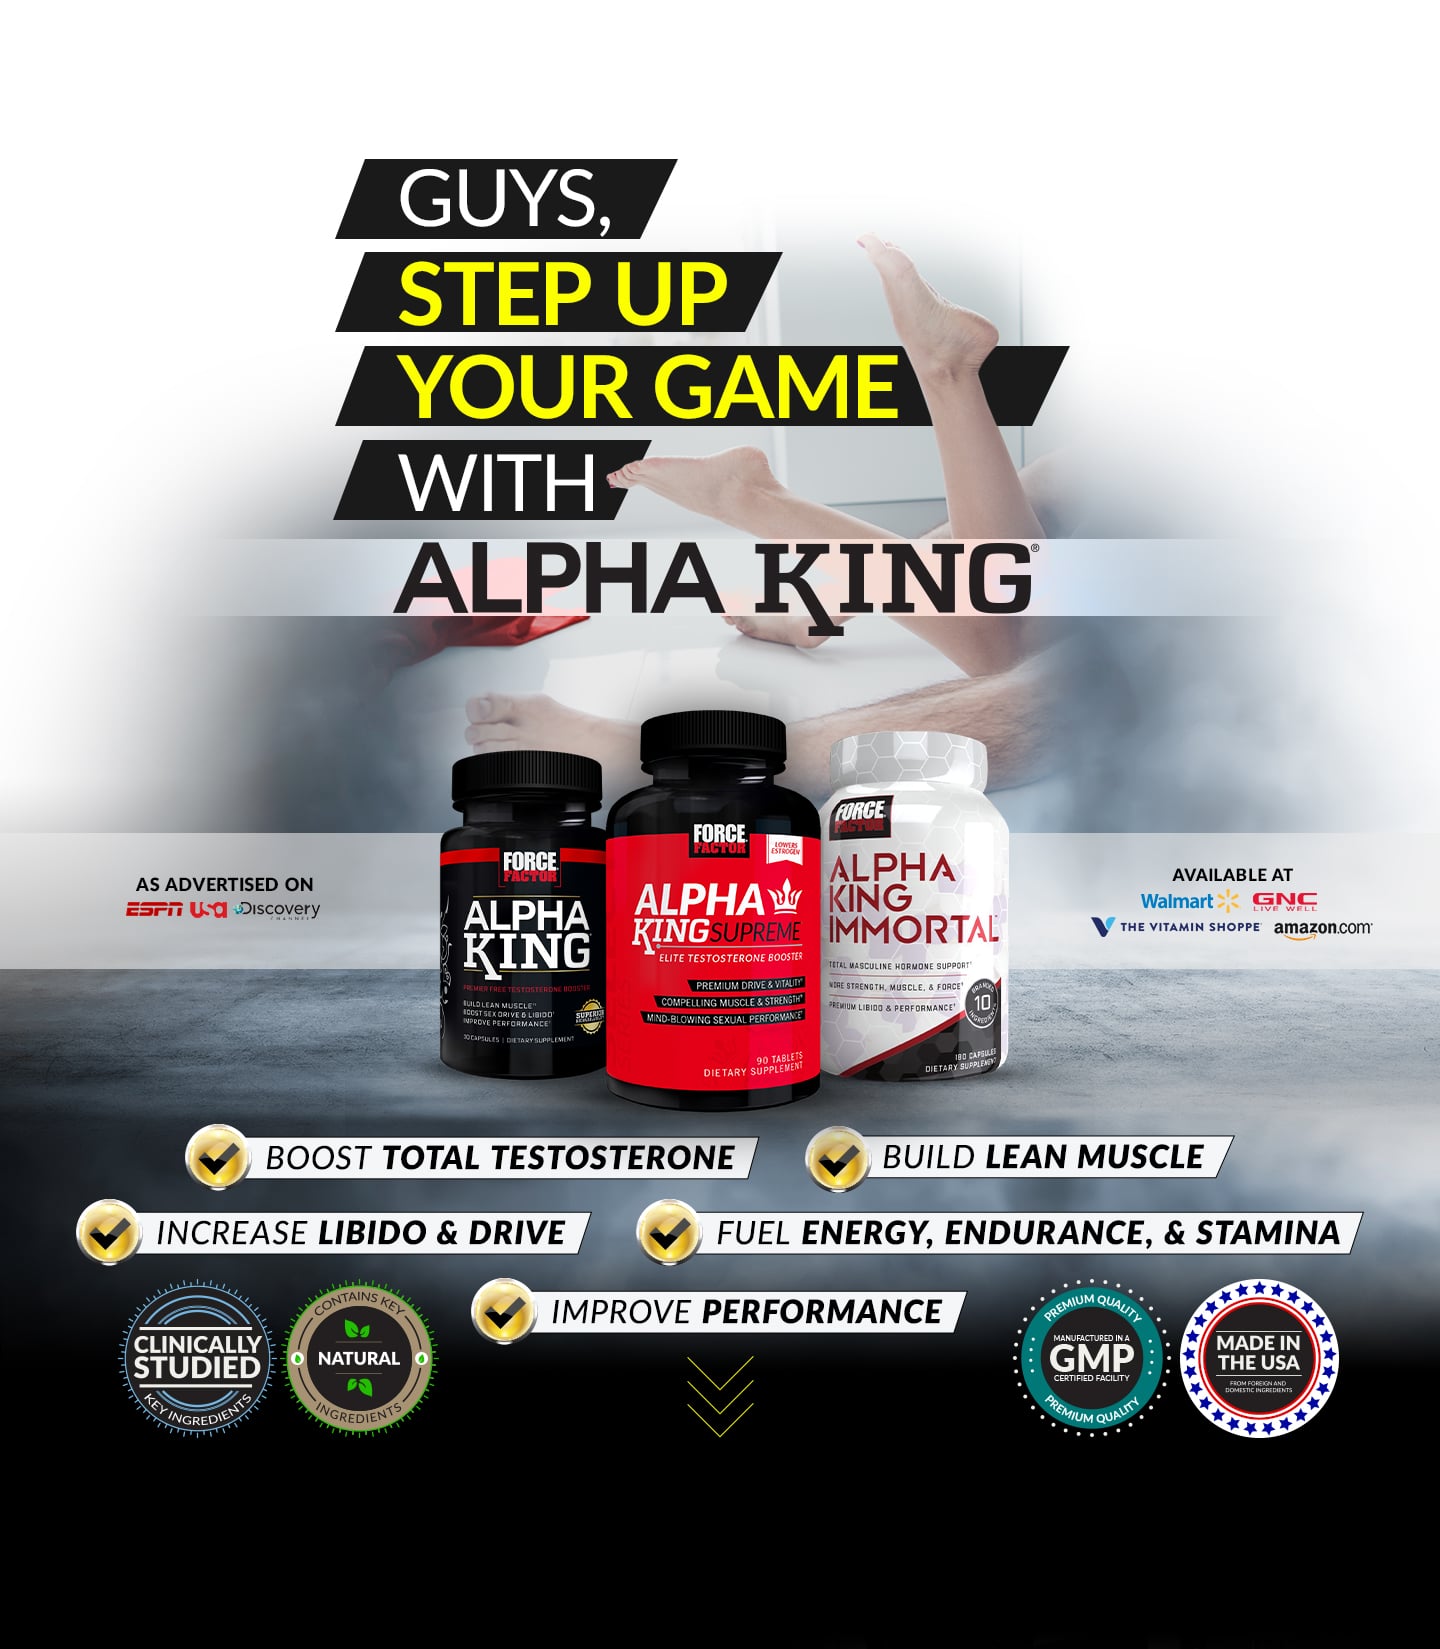 GUYS, STEP UP YOUR GAME WITH ALPHA KING® - BOOST TOTAL TESTOSTERONE, BUILD LEAN MUSCLE, INCREASE LIBIDO & DRIVE, FUEL ENERGY, ENDURANCE, & STAMINA, IMPROVE PERFORMANCE